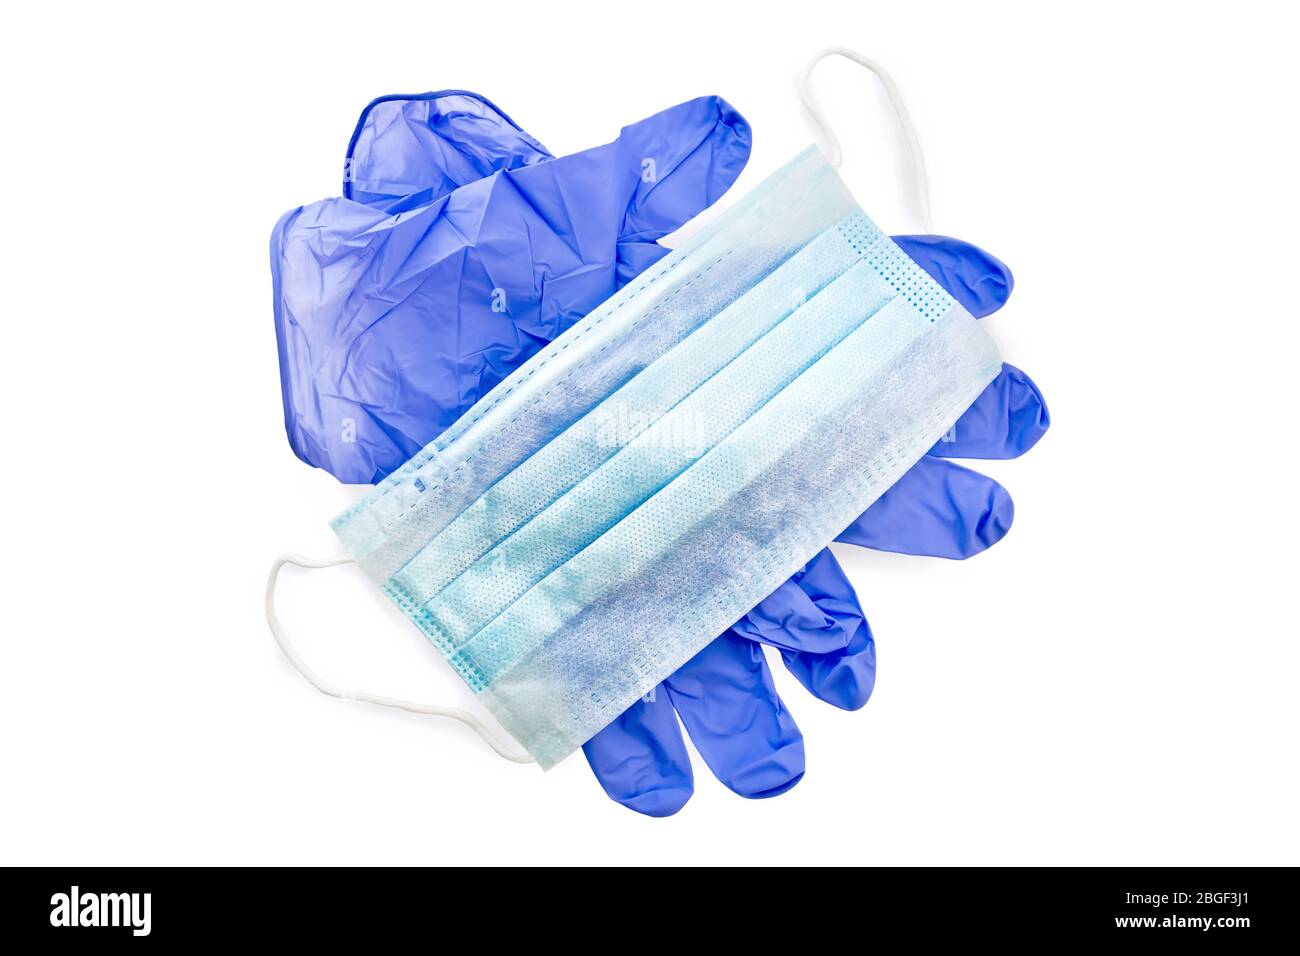 Blue latex gloves and medical disposable mask isolated on white background Stock Photo